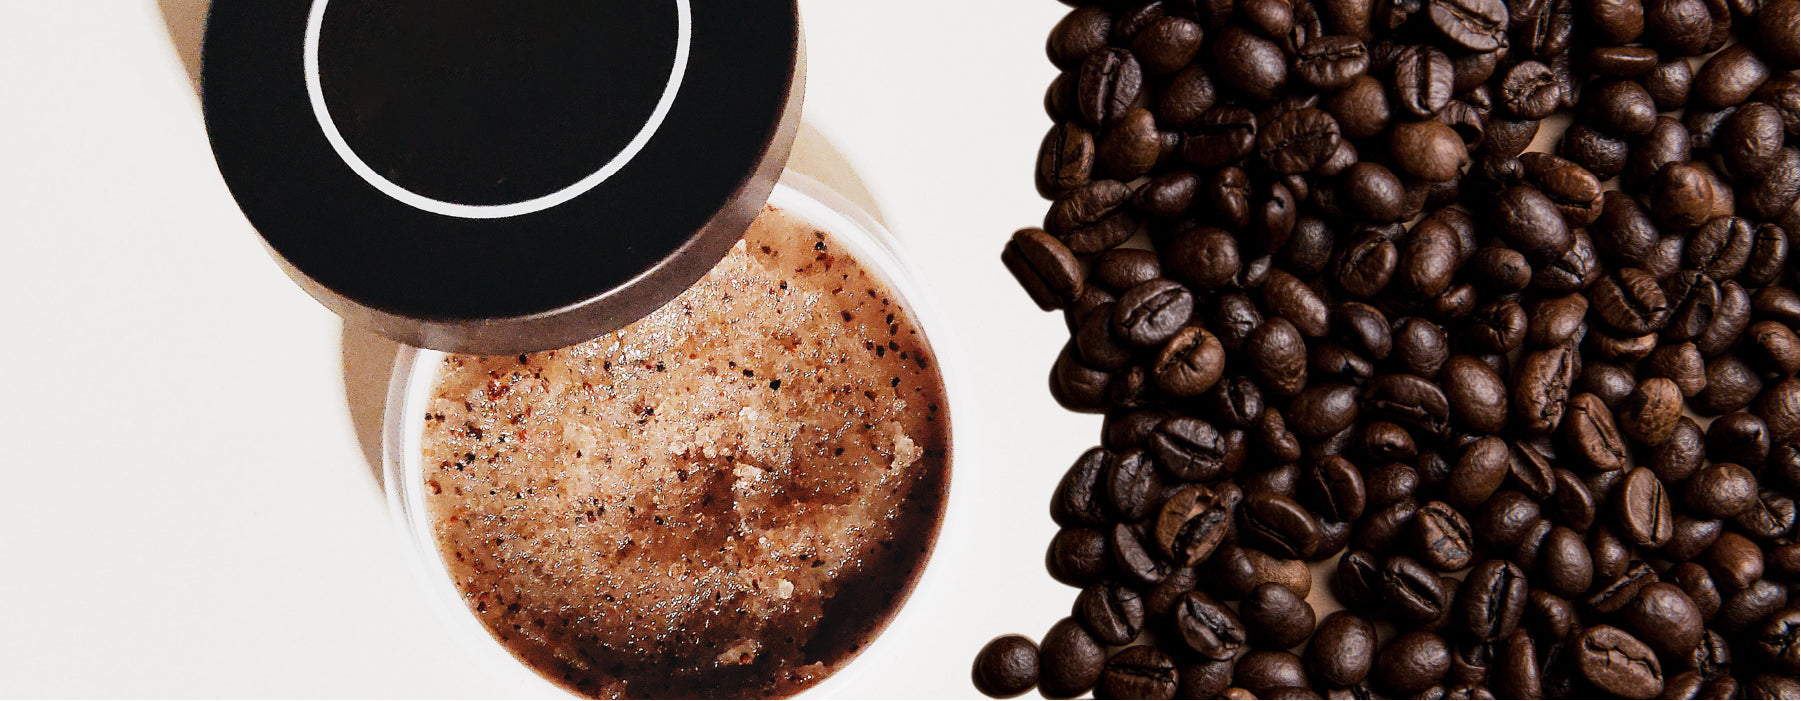 The 7 Benefits Of Using Coffee For Your Face And Skin